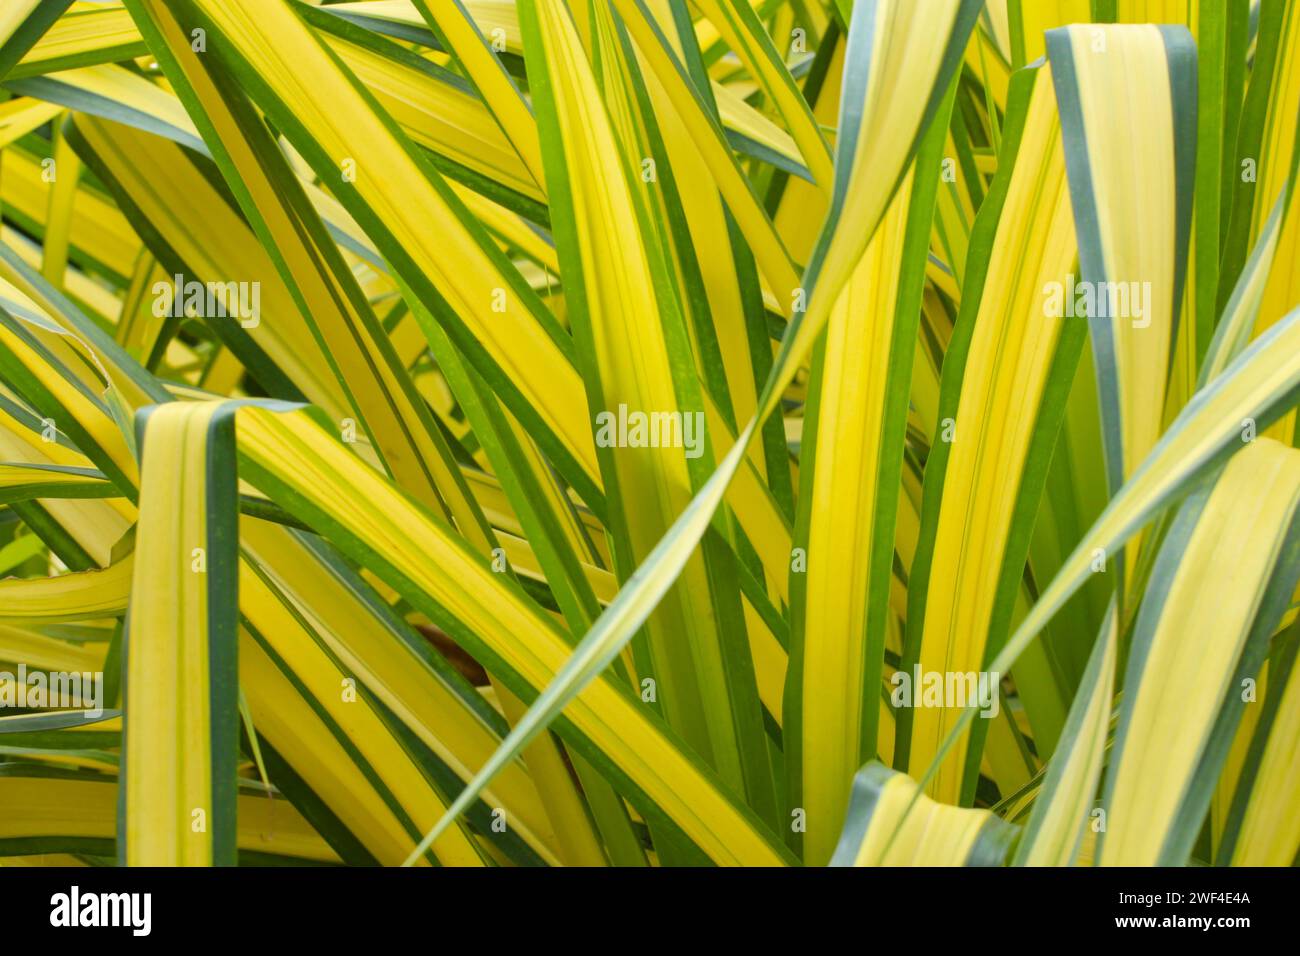 Blue Screw Pine or White Striped Pandanus in the garden, Photography as a natural background for your event backdrop design. Stock Photo